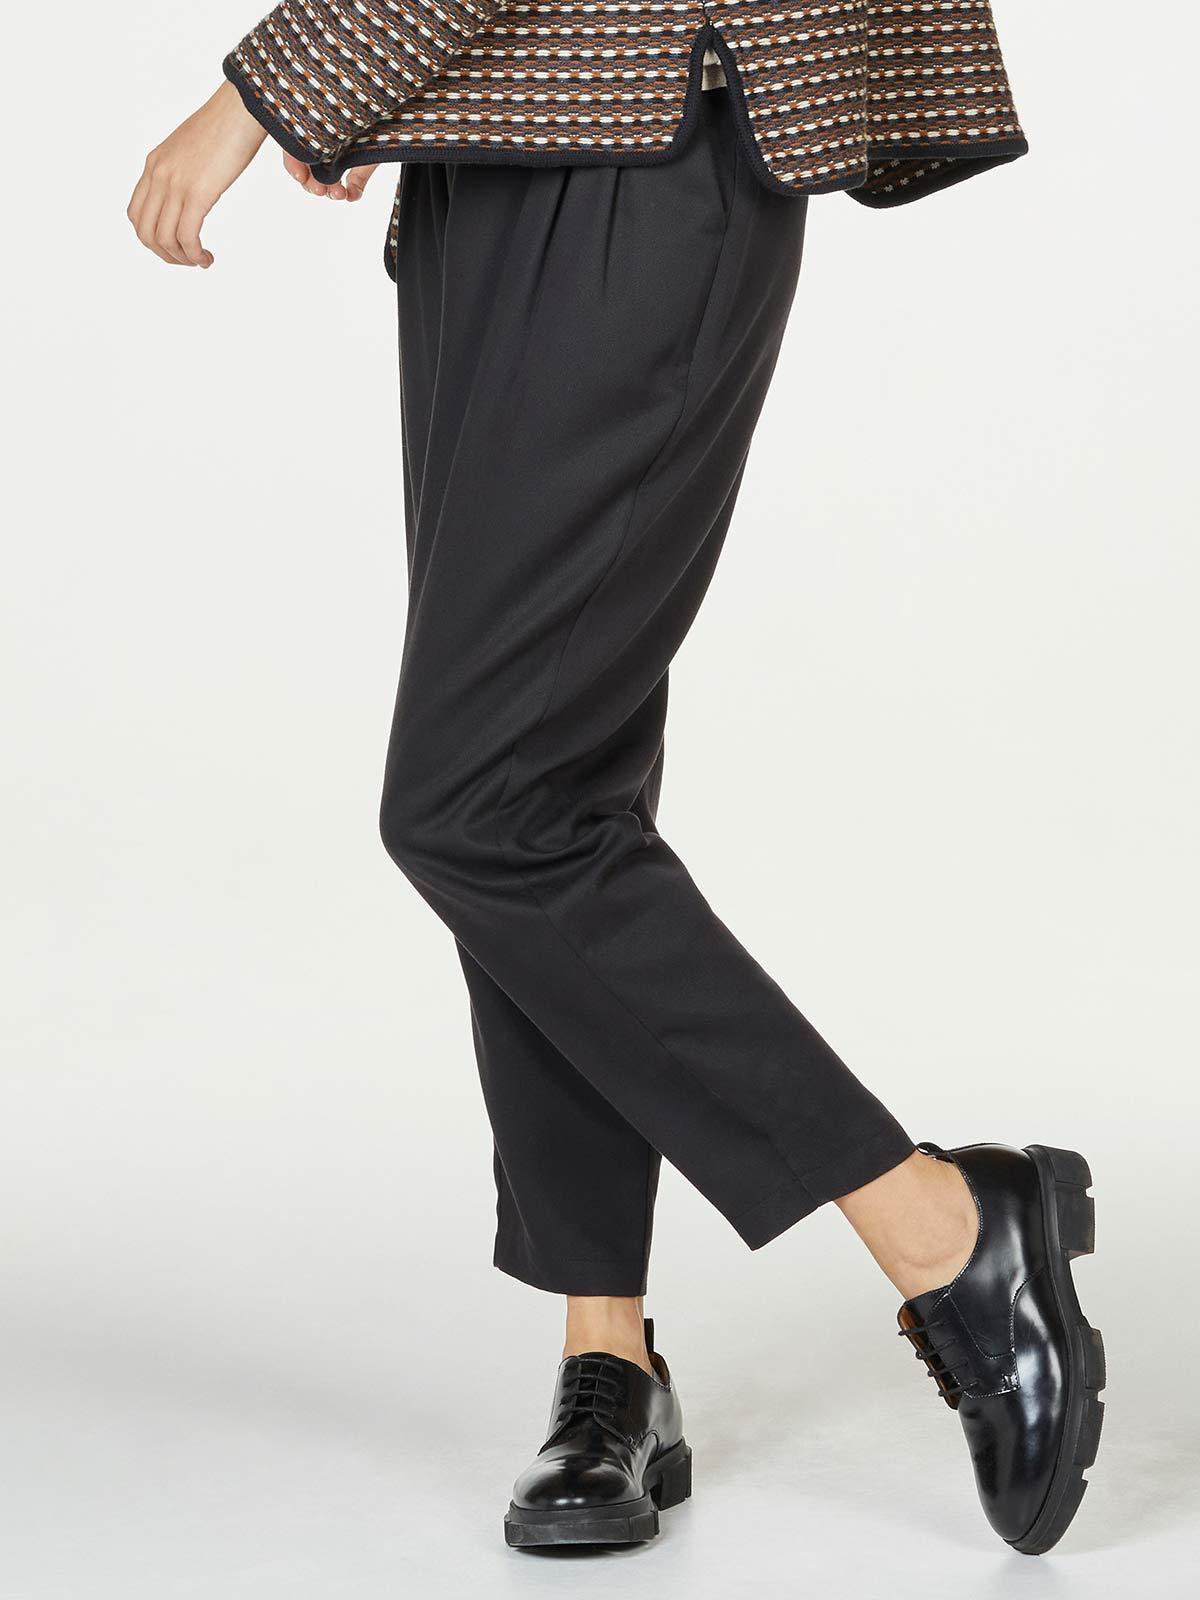 Sartorial Wool Pleated Trouser